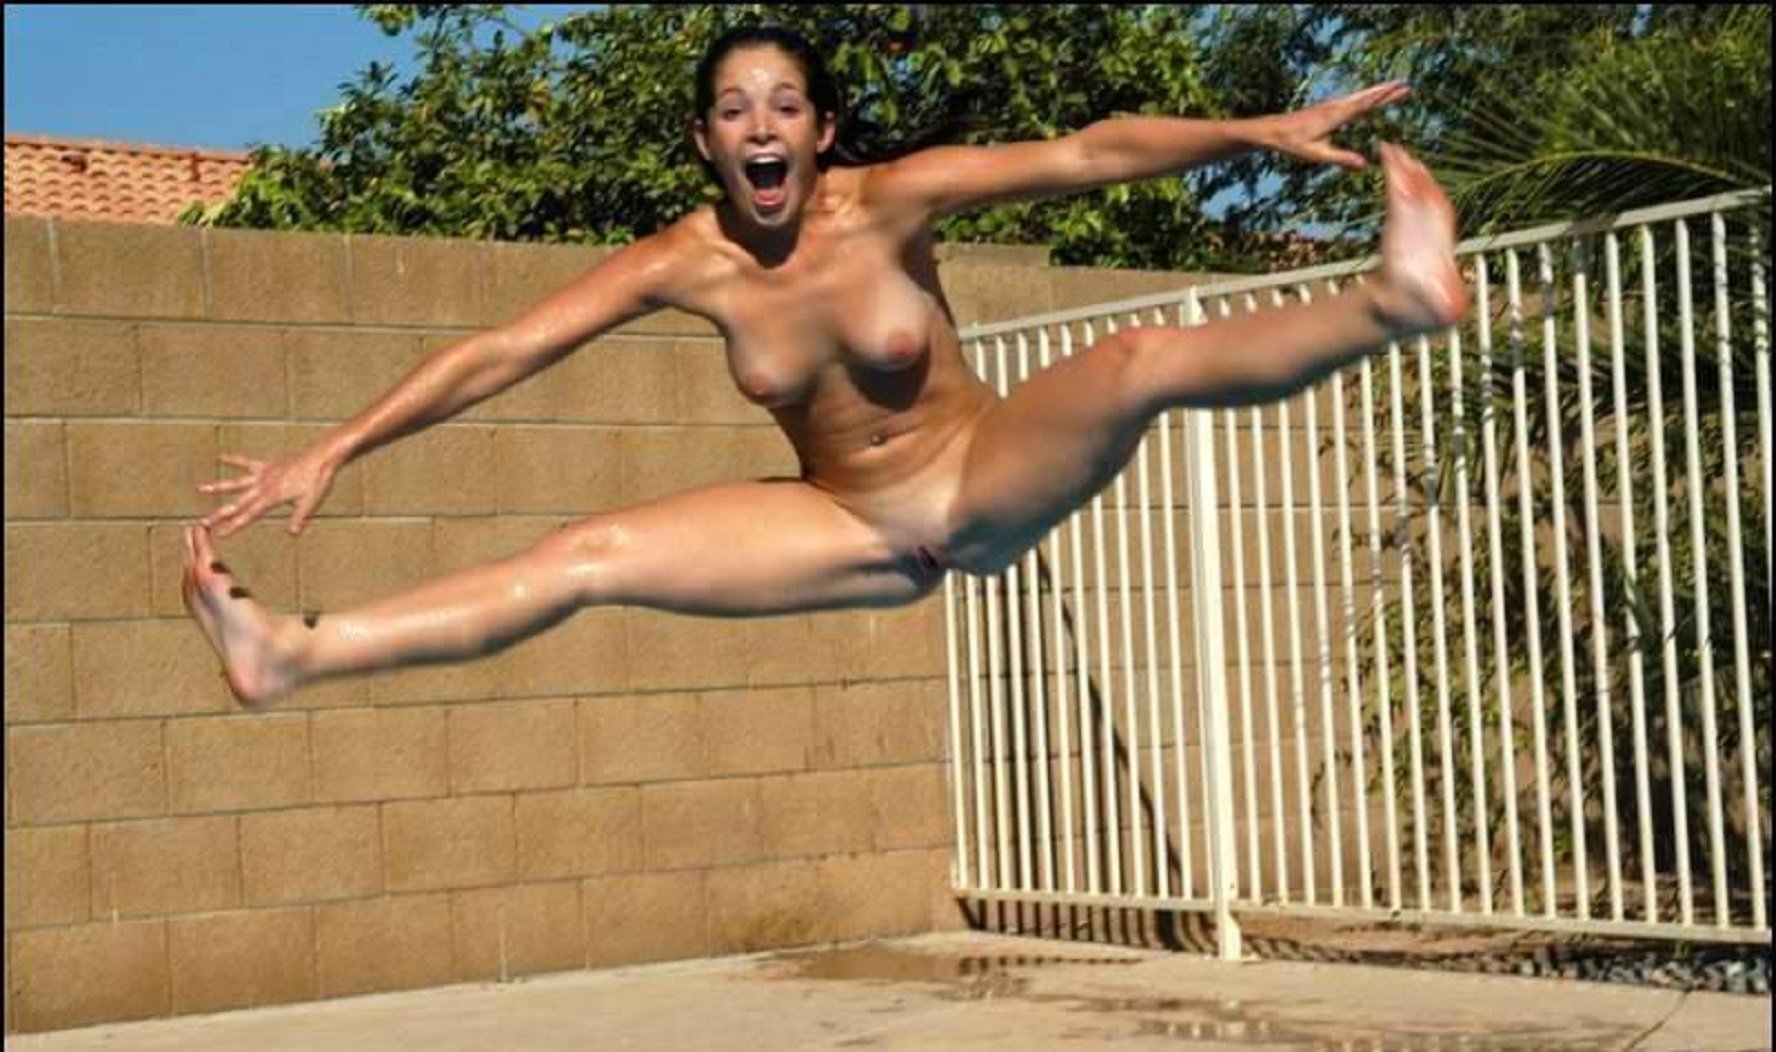 danny diab recommends girls on trampoline naked pic